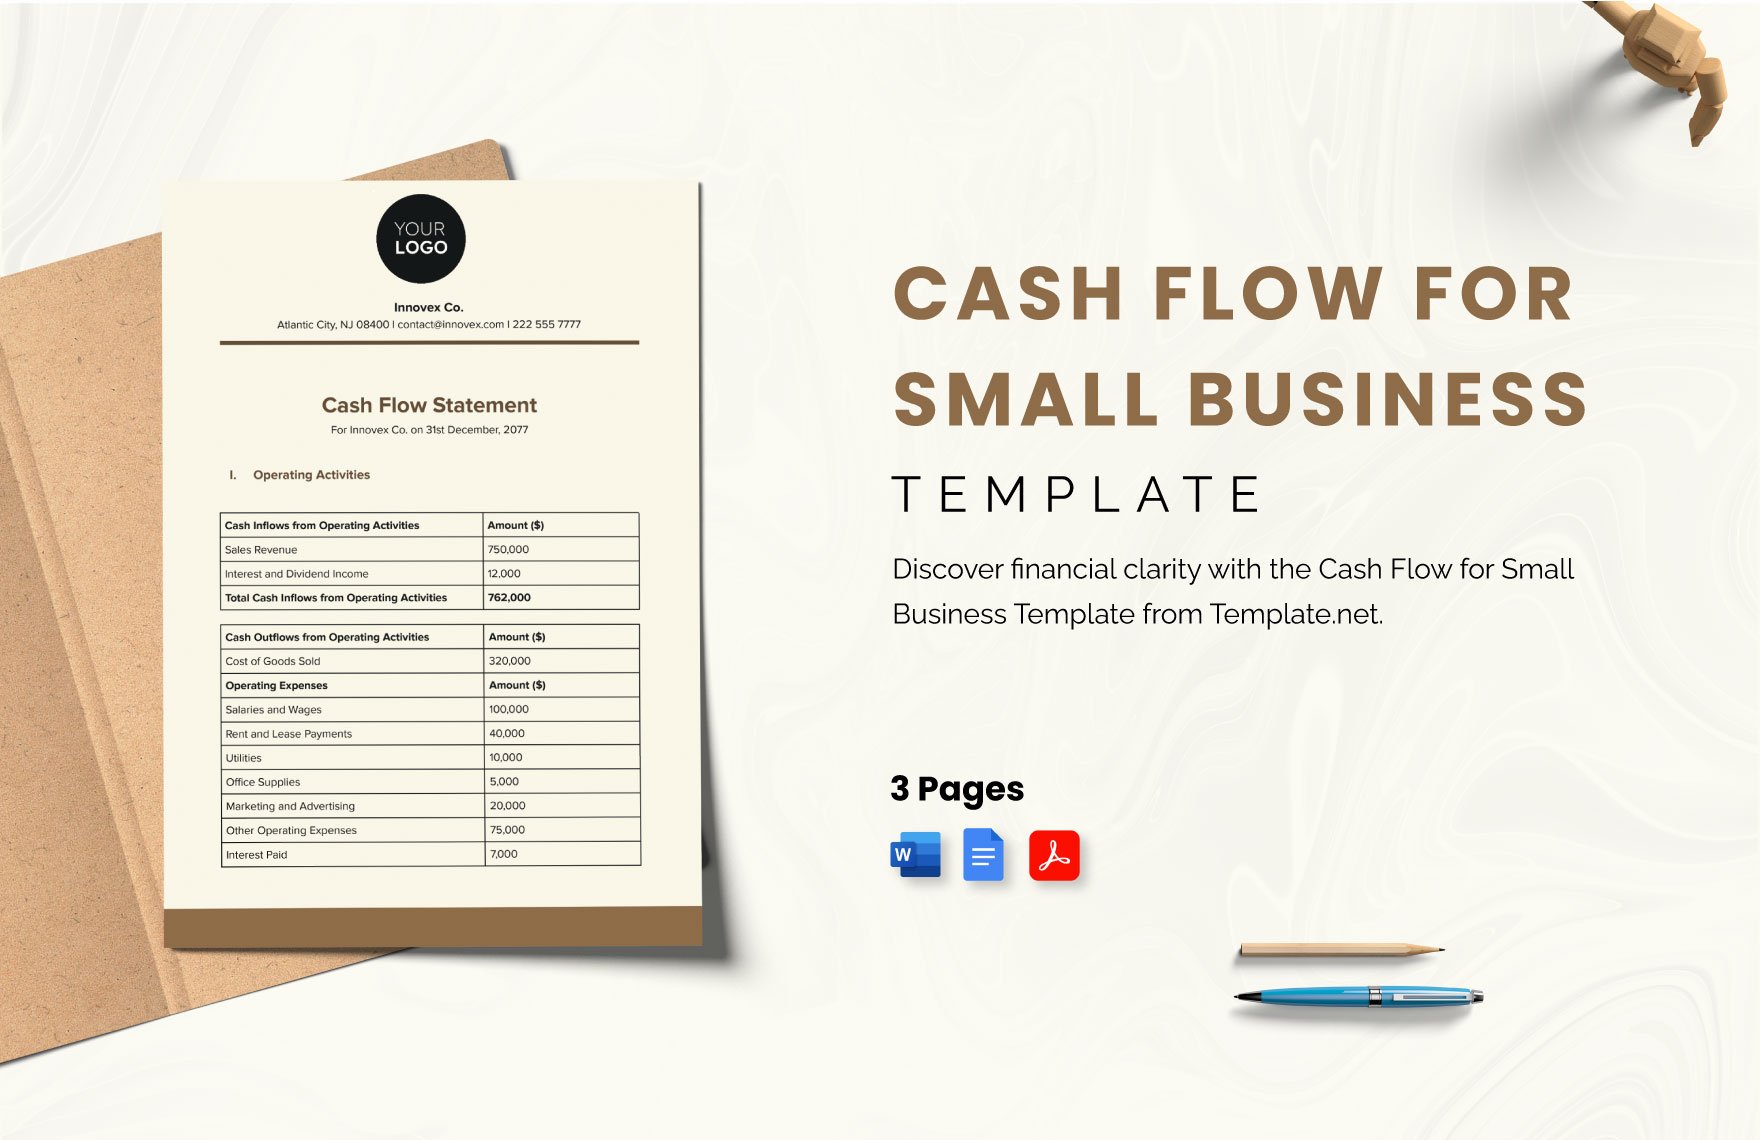 Cash Flow for Small Business Template